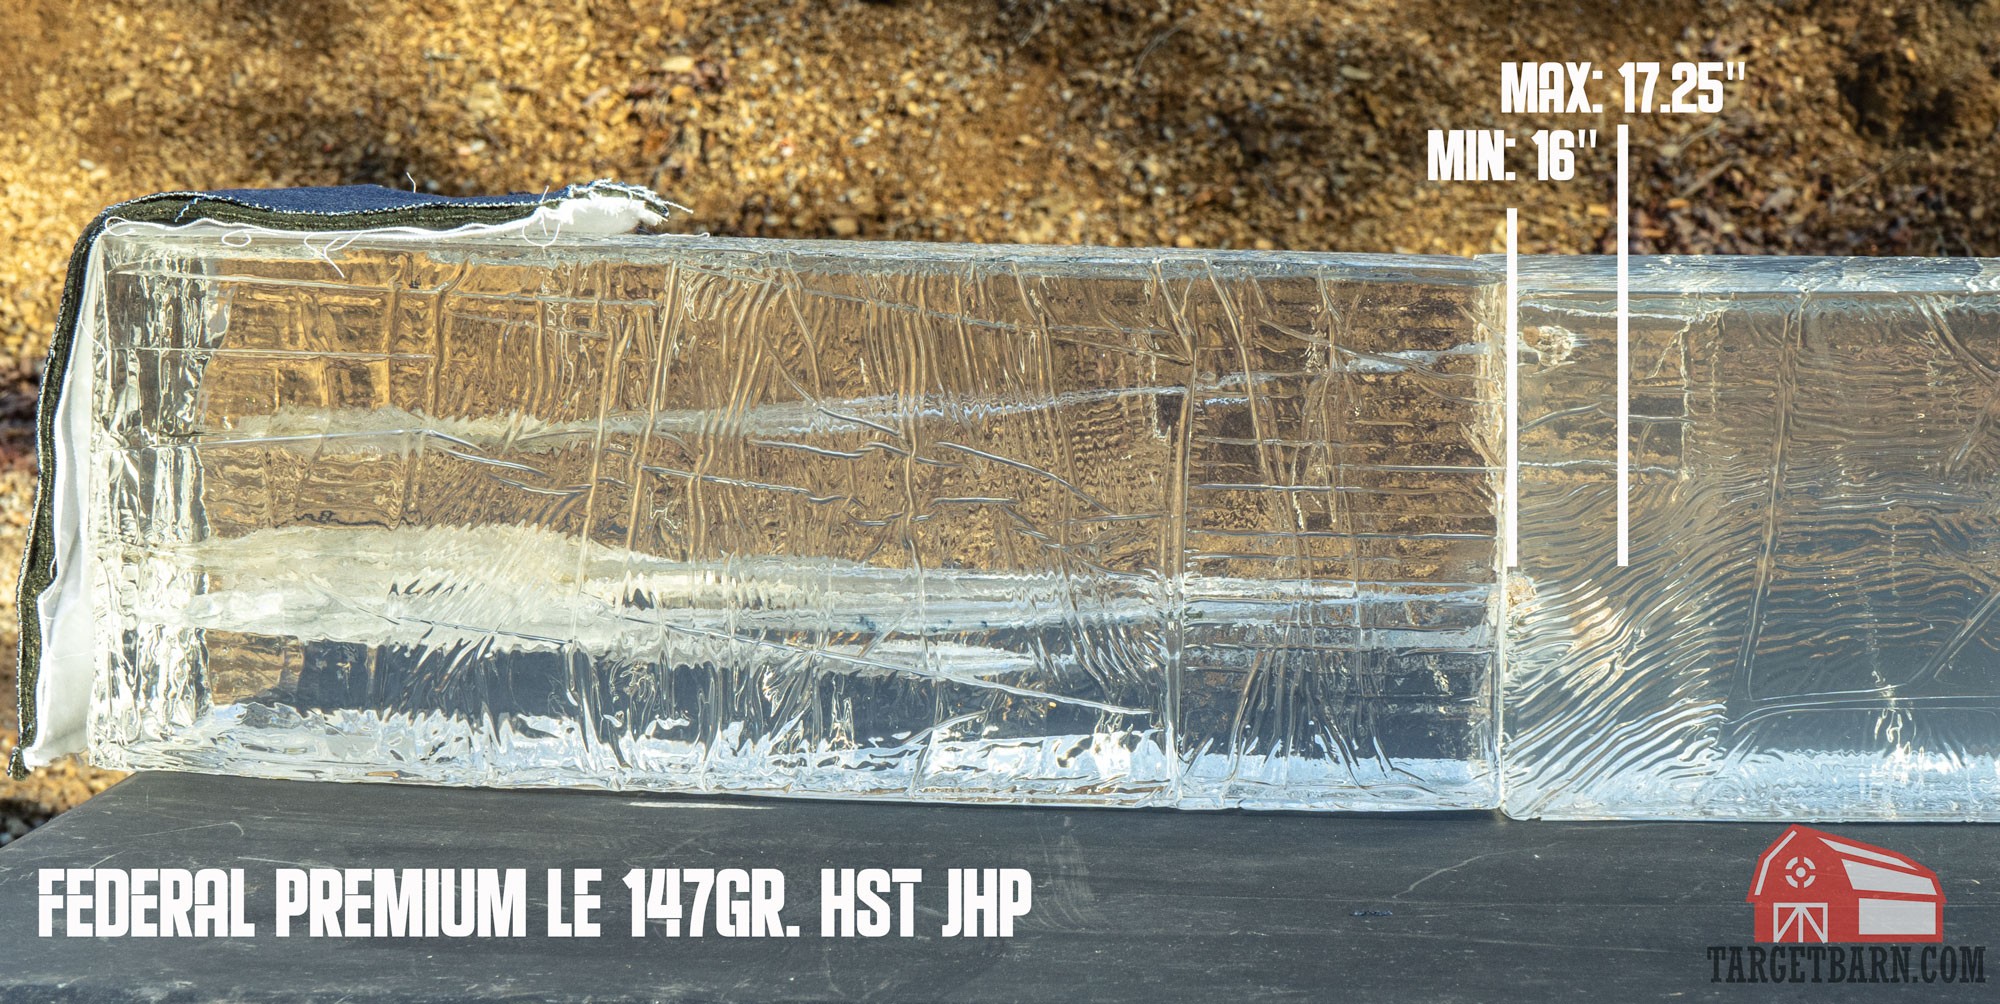 a ballistic gel block after gel testing 5 shots of federal le 147gr. hst jhp have been shot into it, with the minimum and maximum penetrations marked